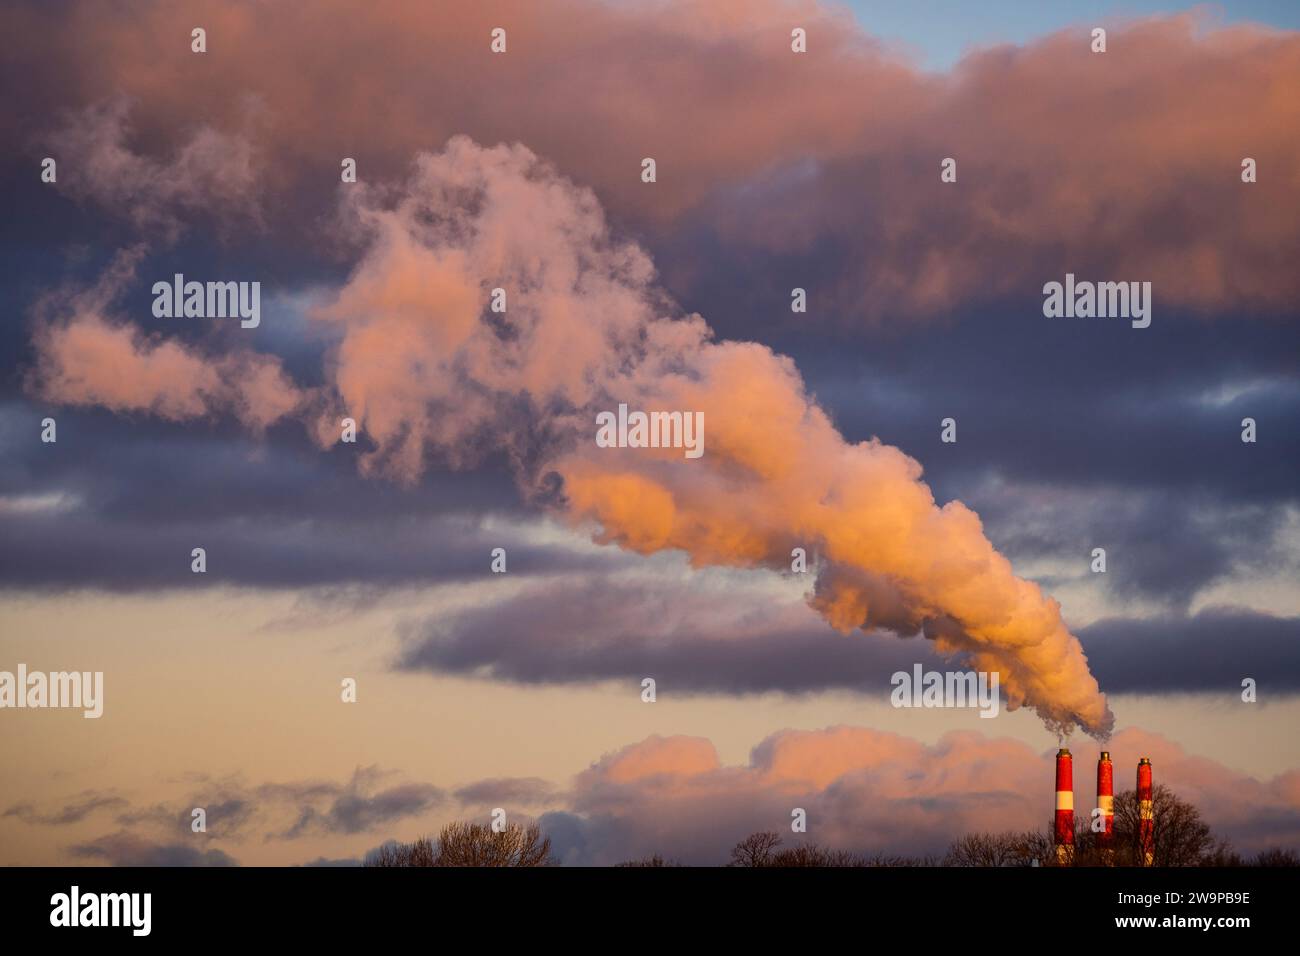 A large plume emitting to the sky from three smoke stacks. Stock Photo